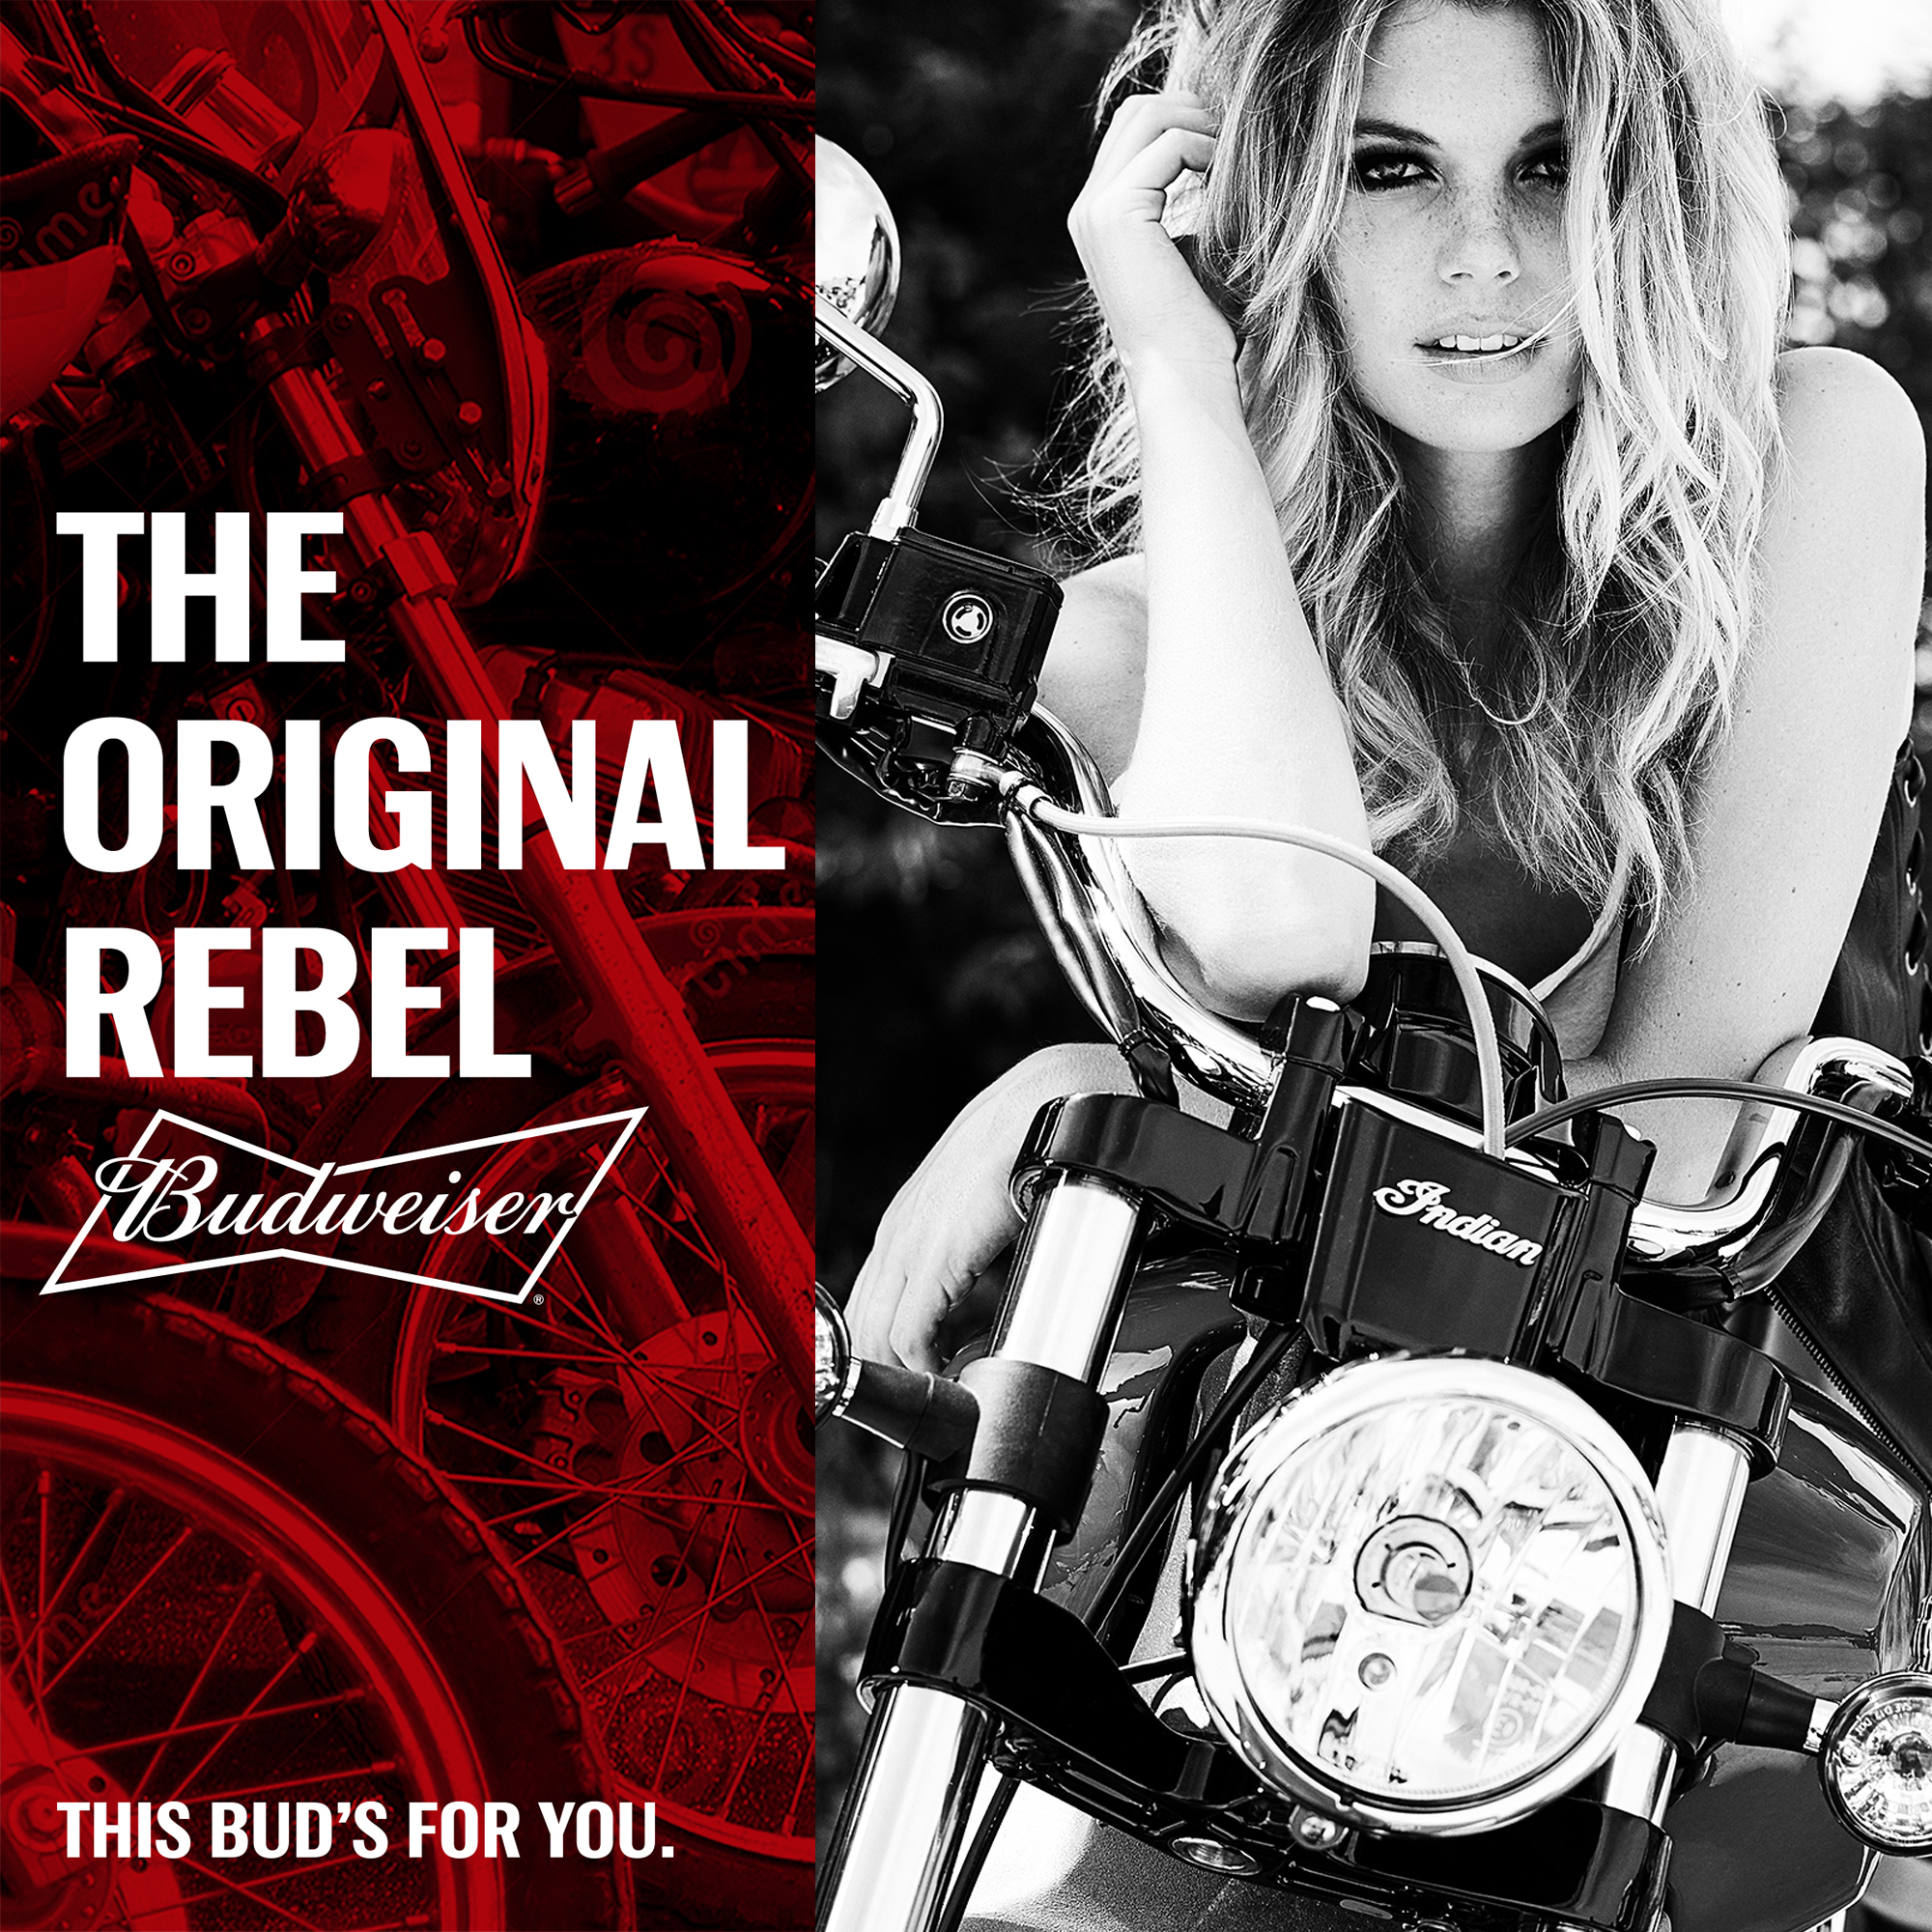 The Original Rebel - Budweiser Motorcycle Campaign